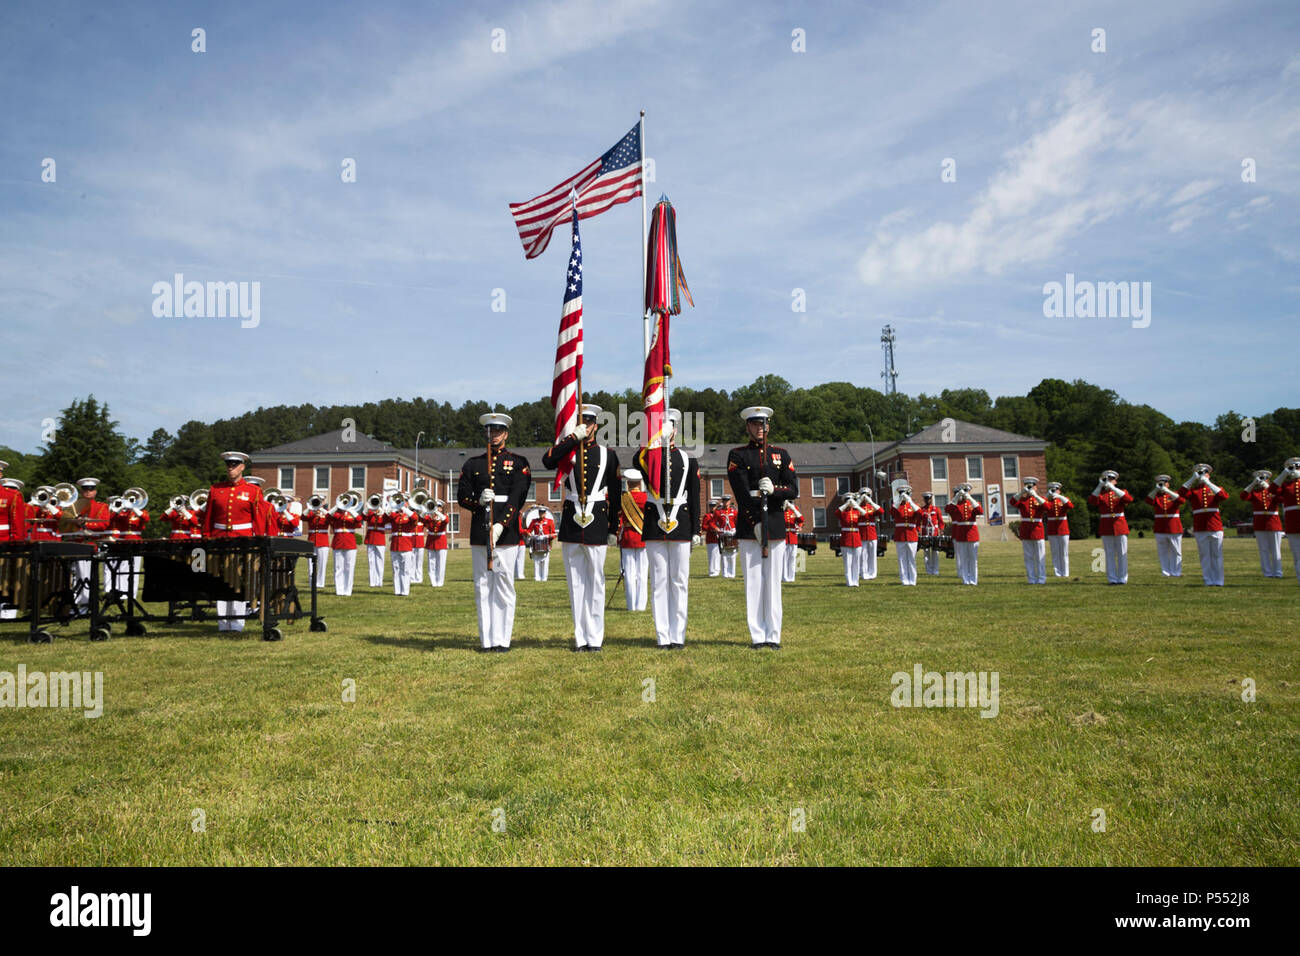 The U.S. Marine Corps Quantico Color Guard presents the colors during the Centennial Celebration Ceremony at Lejeune Field, Marine Corps Base (MCB) Quantico, Va., May 10, 2017. The event commemorates the founding of MCB Quantico in 1917, and consisted of performances by the U.S. Marine Corps Silent Drill Platoon and the U.S. Marine Drum & Bugle Corps. Stock Photo